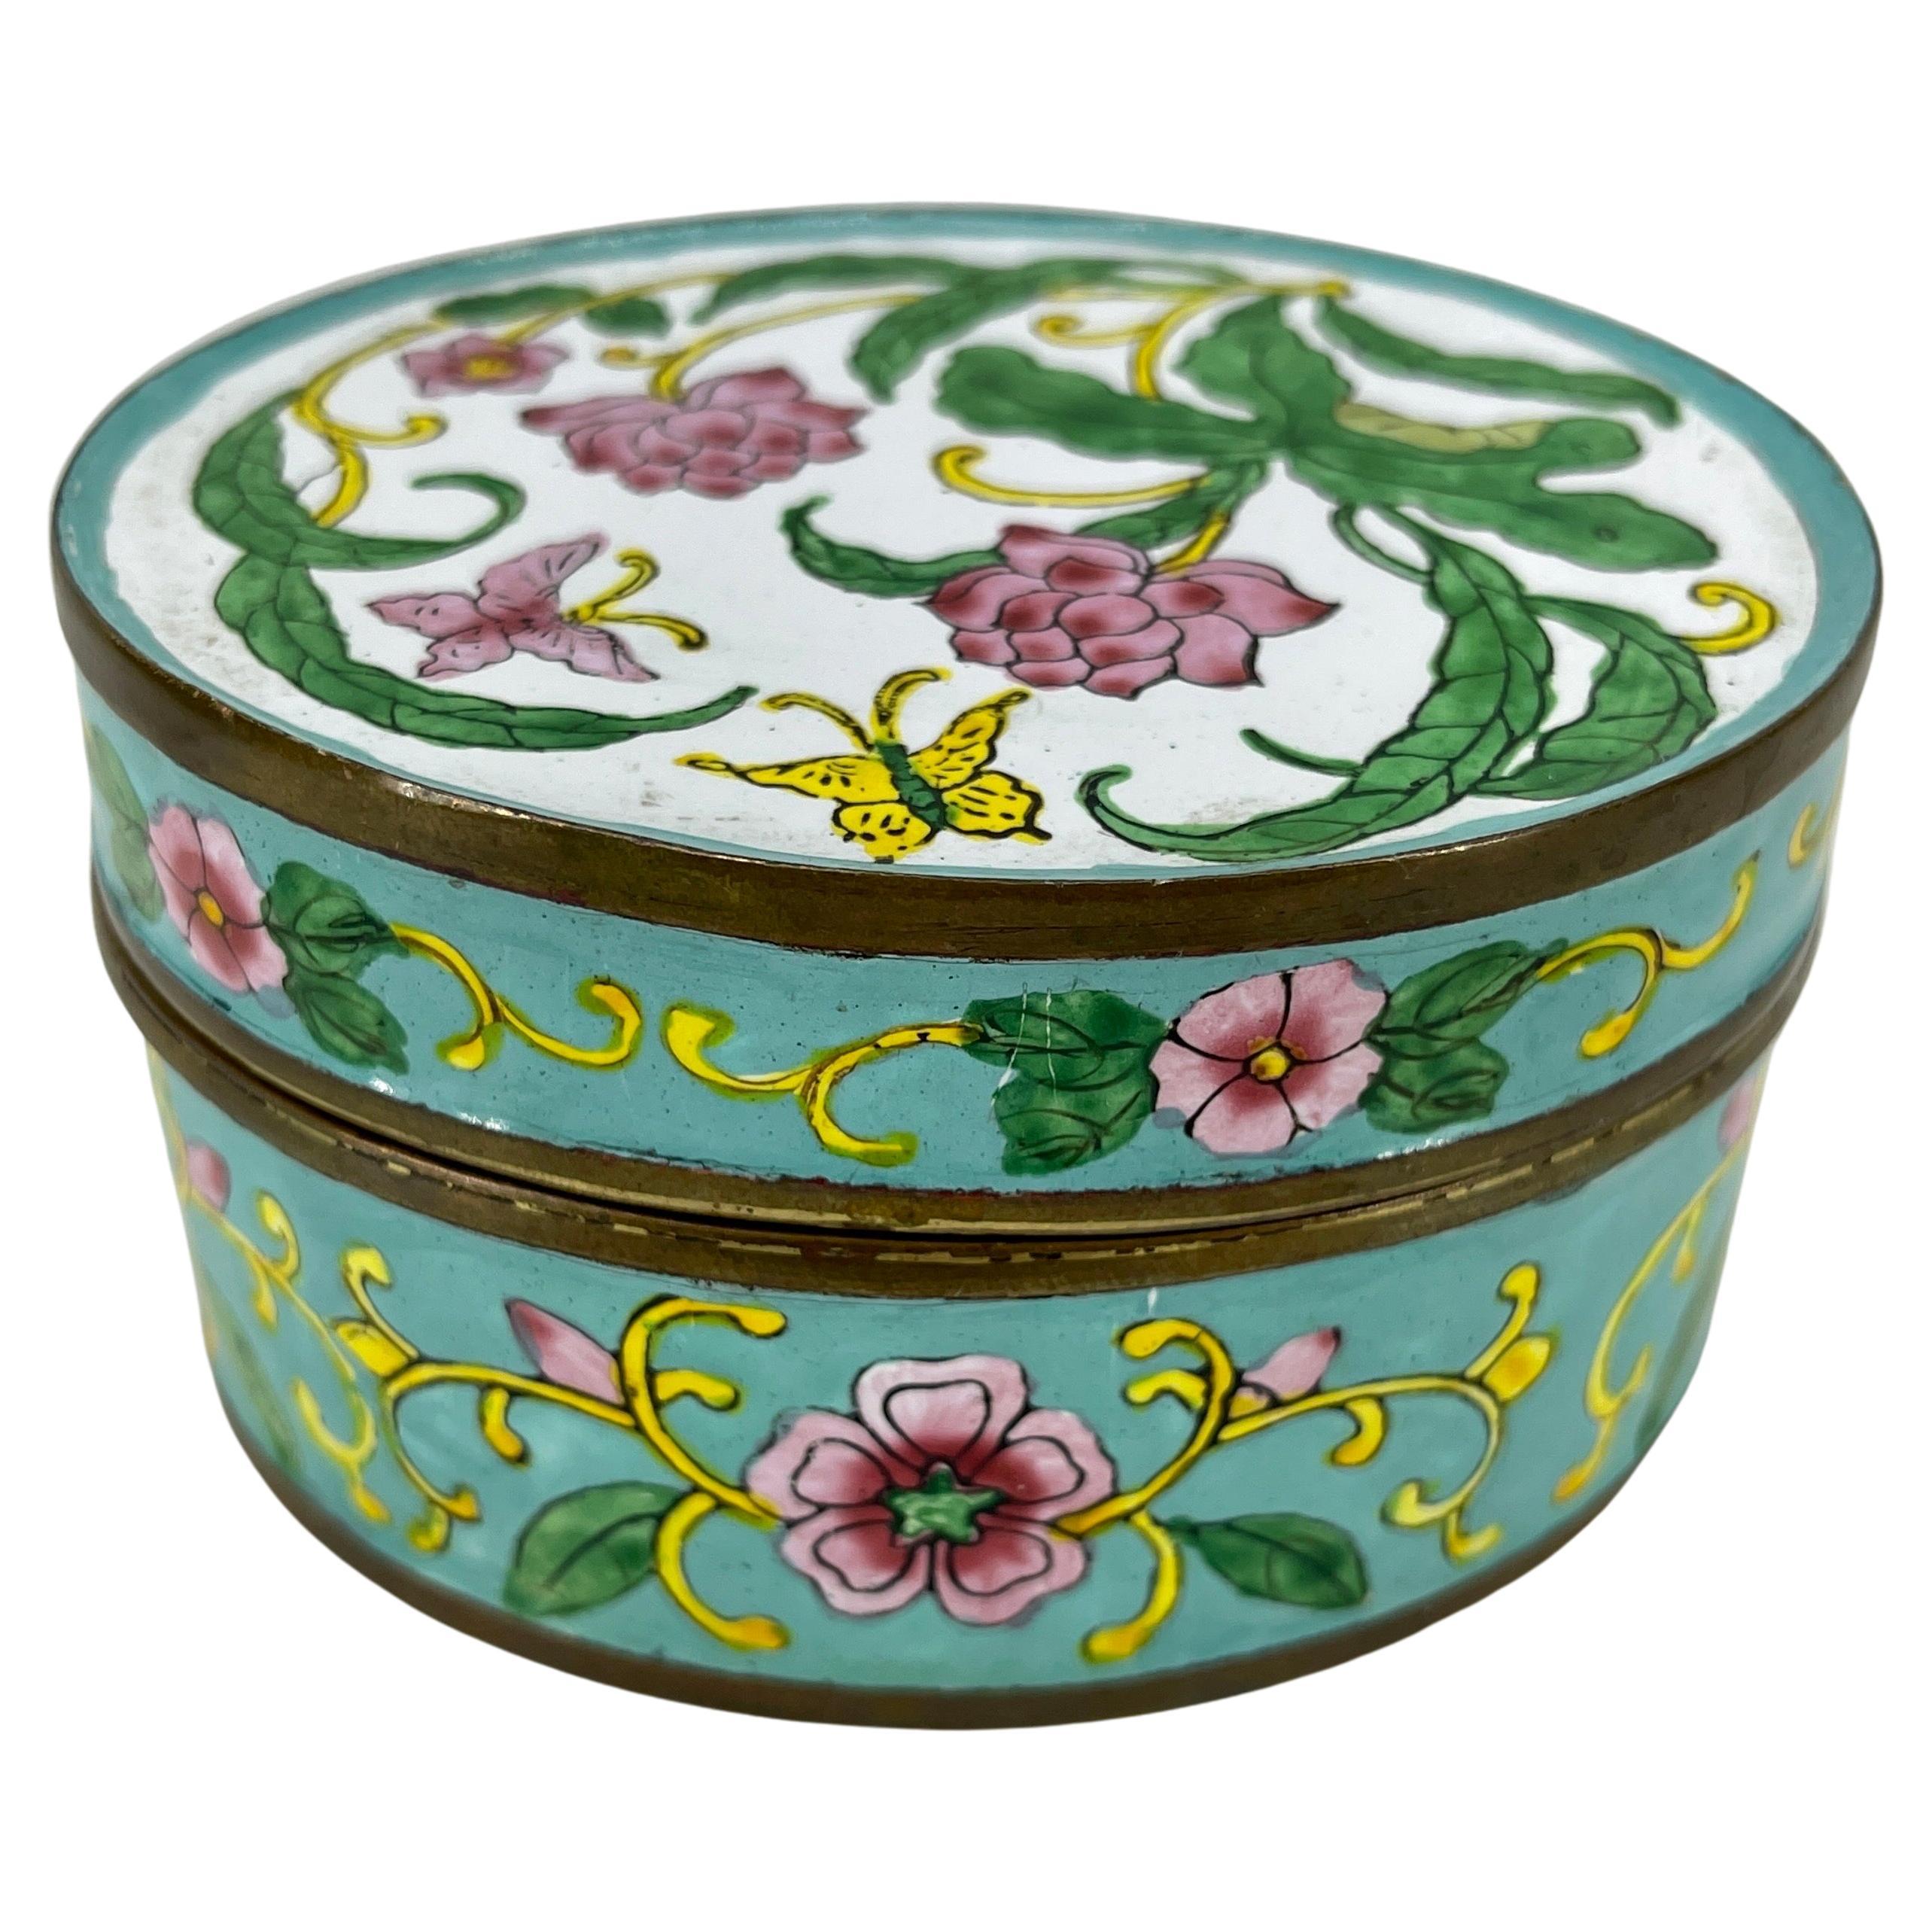 Oval Flower Decorated Cloisonné Enamel Jewelry Box, China, 1920's